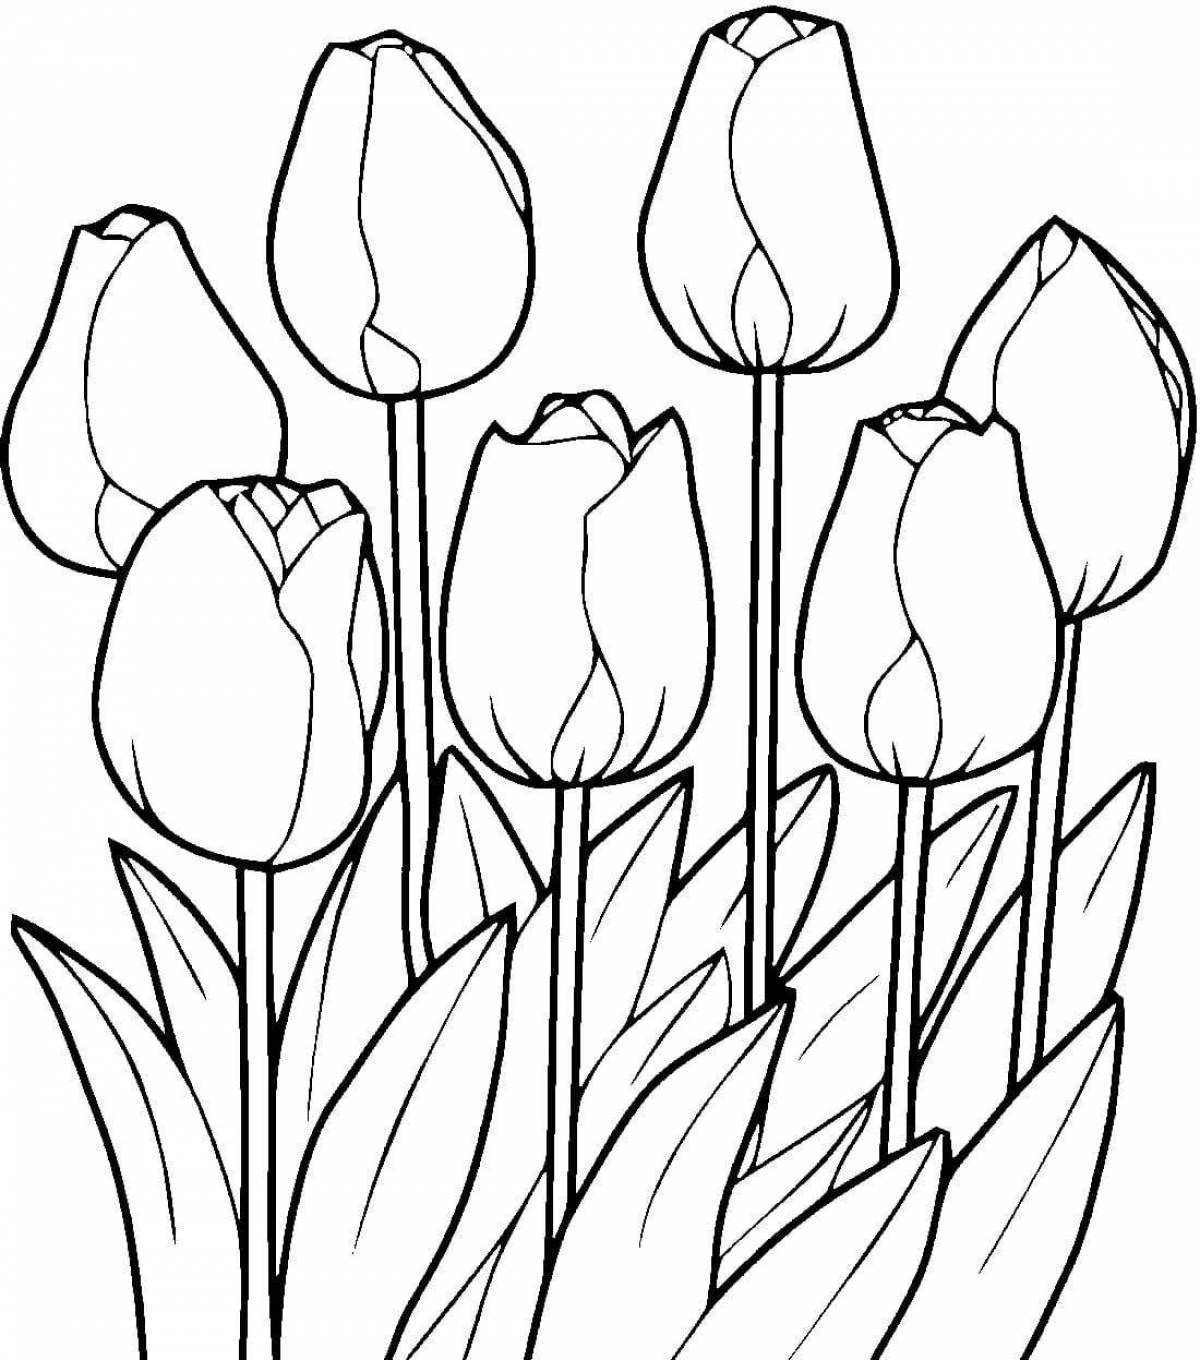 Colouring brightly colored spring tulips